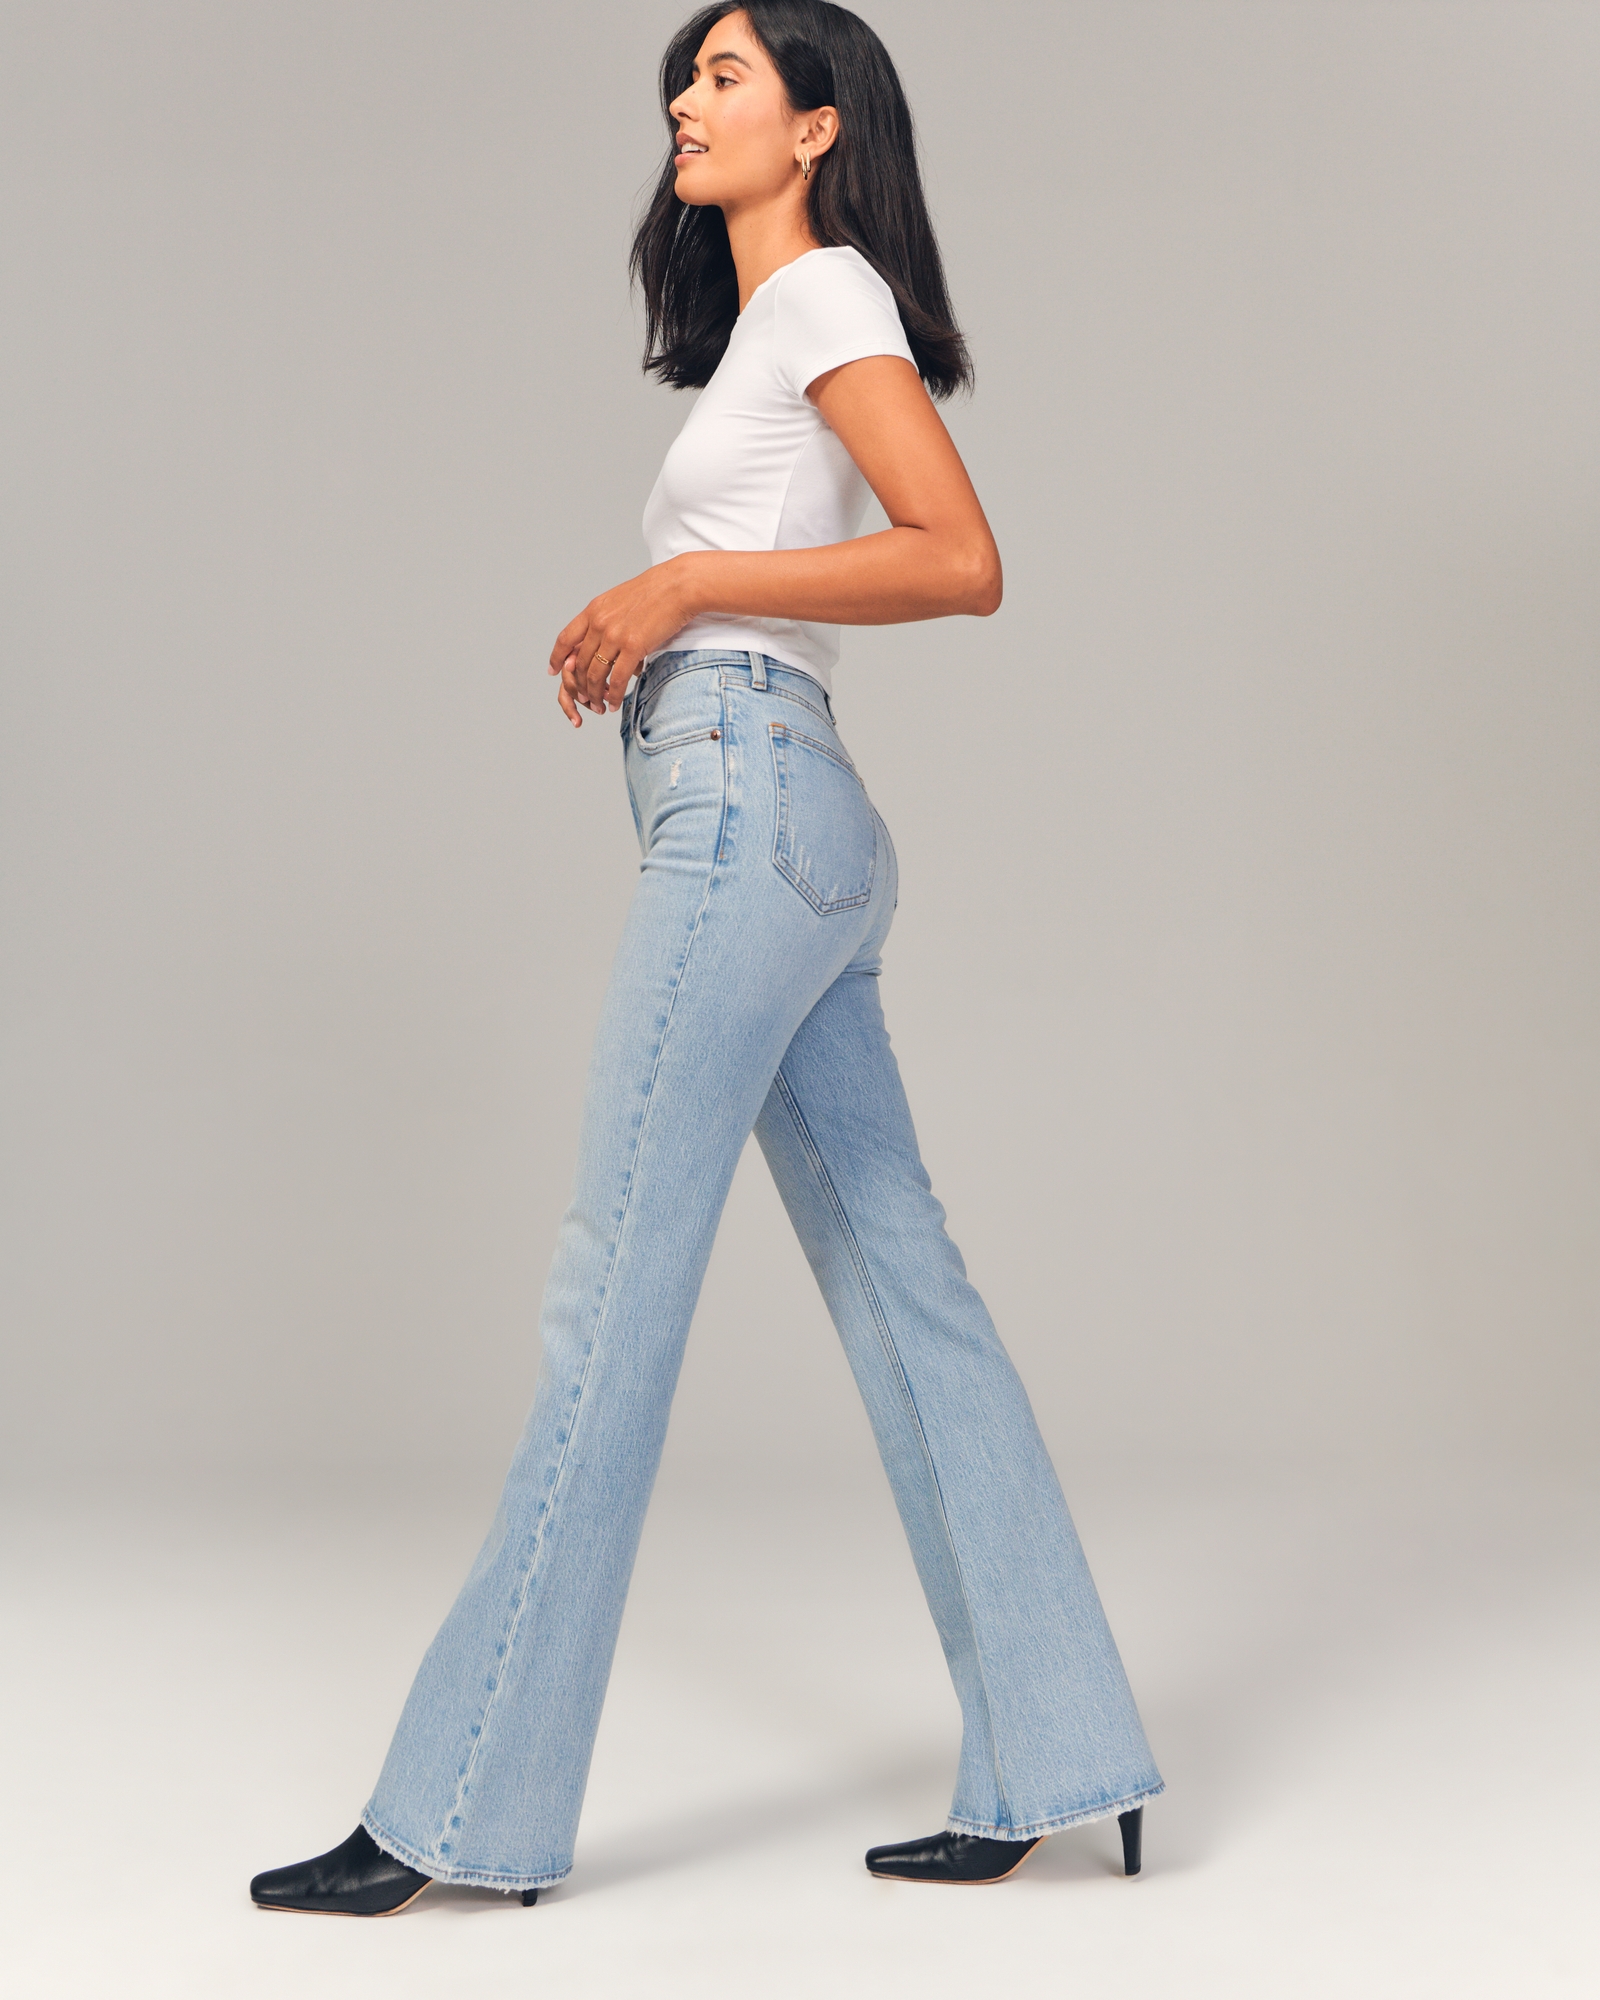 White Midriff and Vintage High Waist Trousers